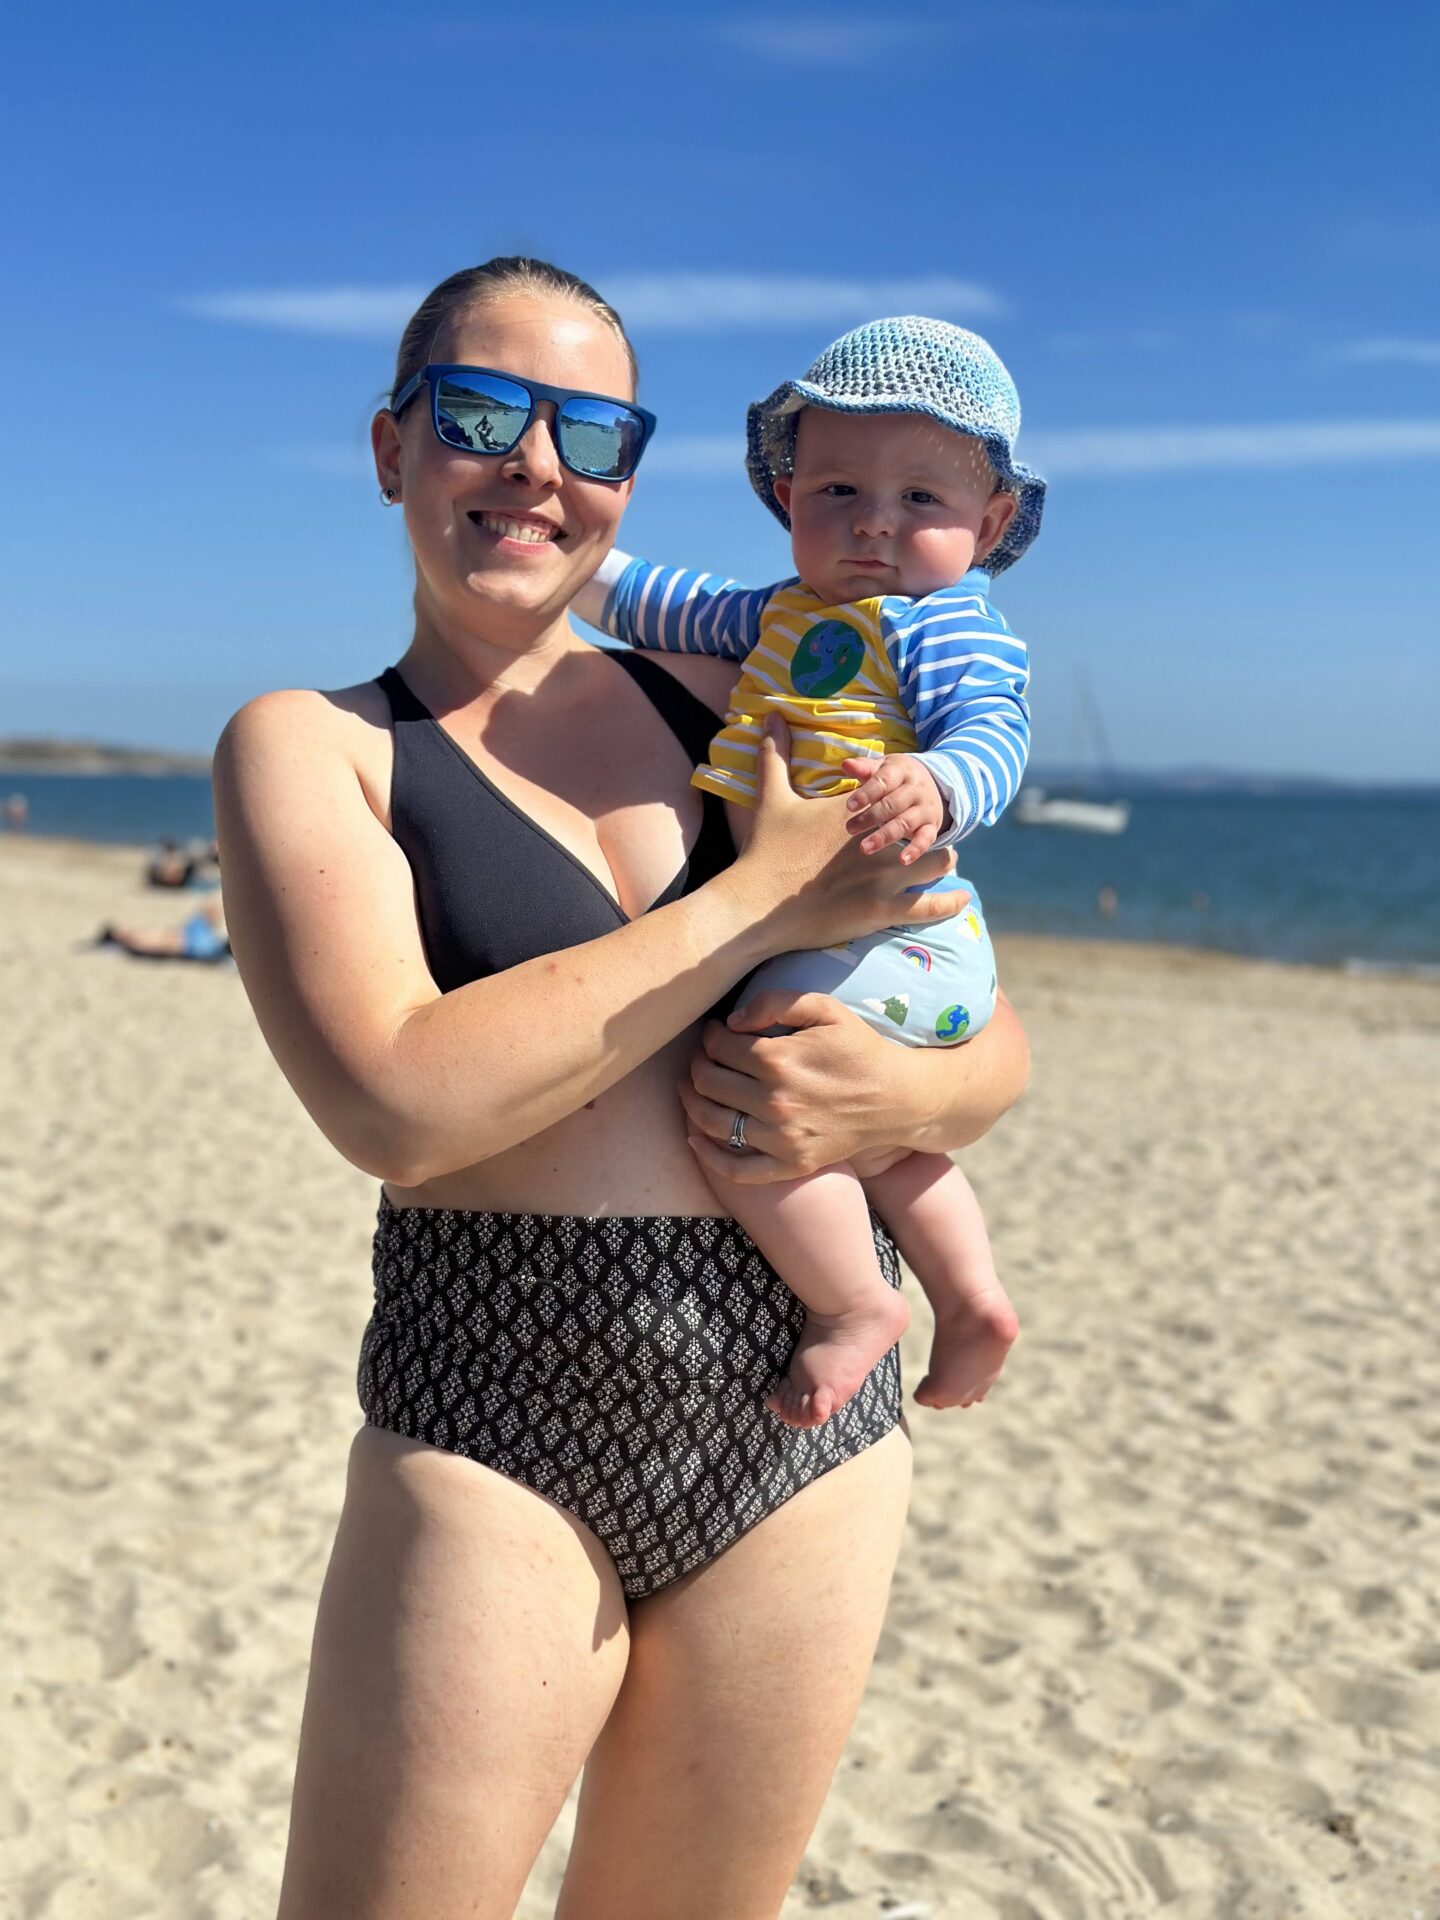 woman in a black bikini is smiling at the camera holding a baby in a striped swim outfit and crocheted hat. A sandy beach is blurred behind them. 